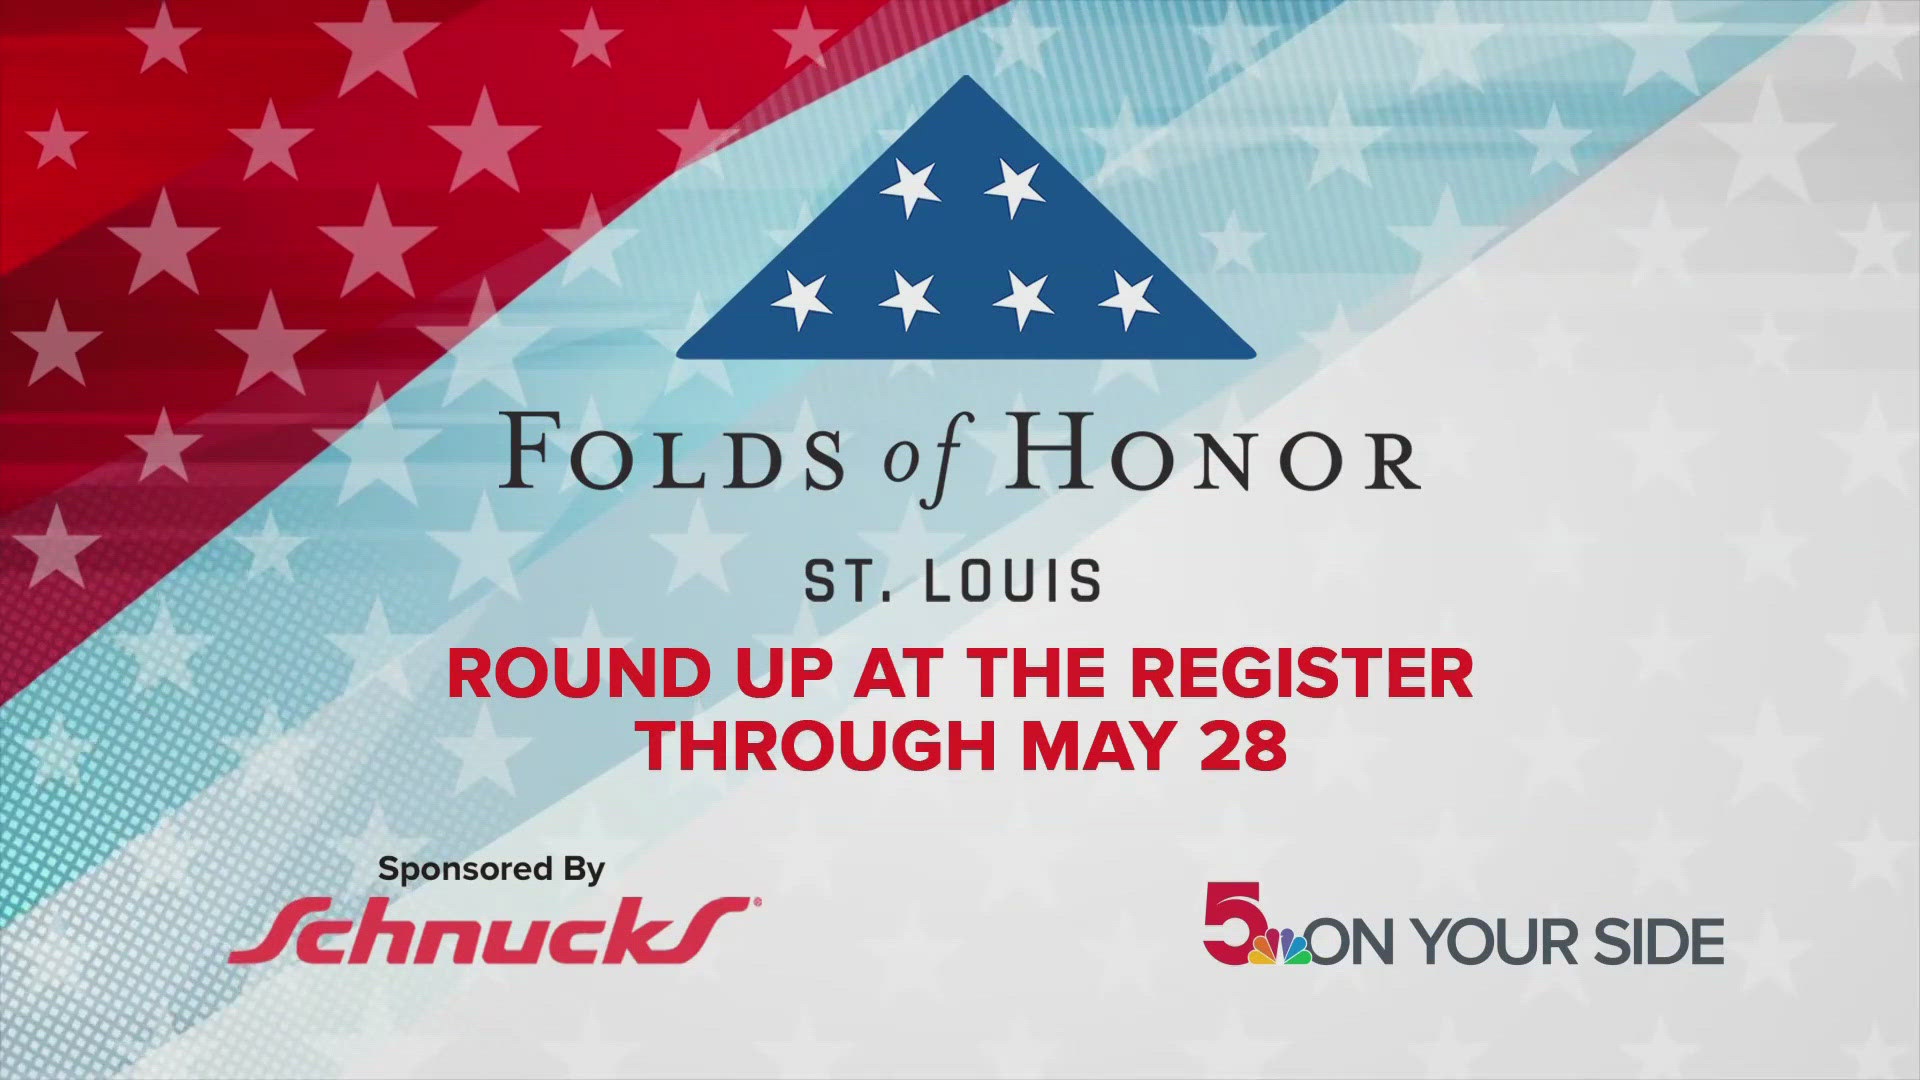 There's still time to participate in this year's Folds of Honor campaign by rounding up at the register. Your generosity will help change lives.